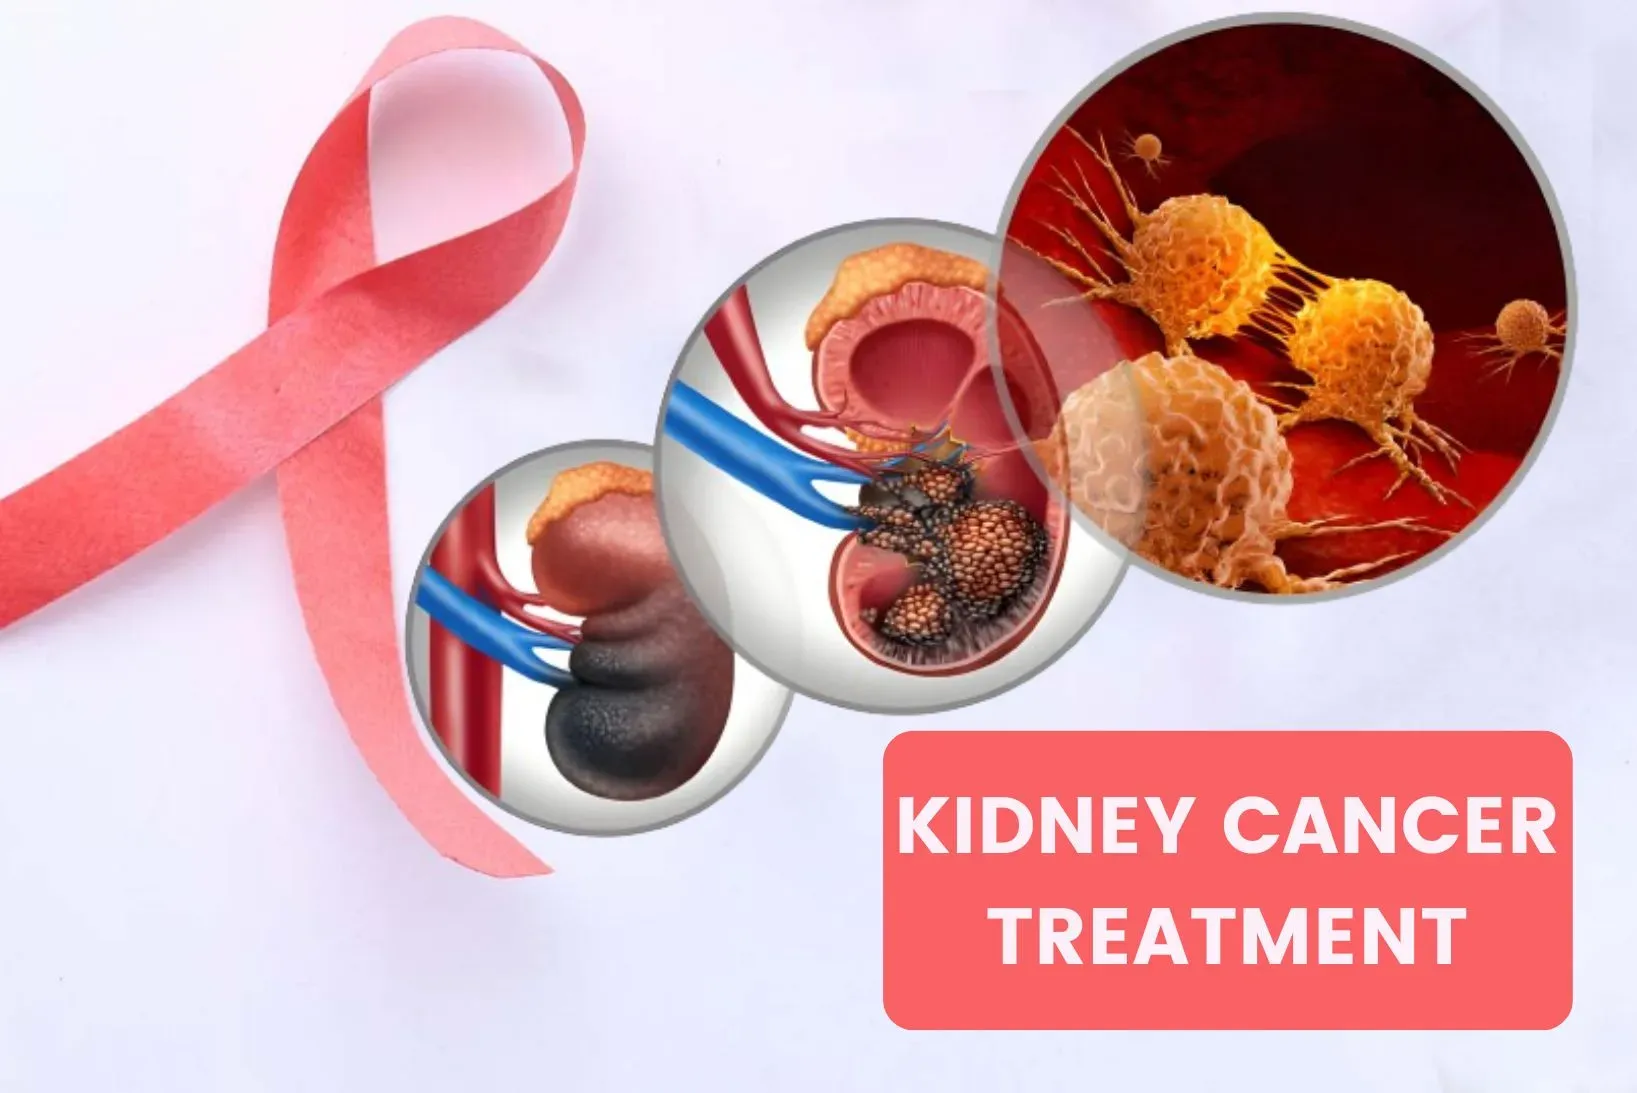 Kidney Cancer Symptoms, Diagnosis and Treatment